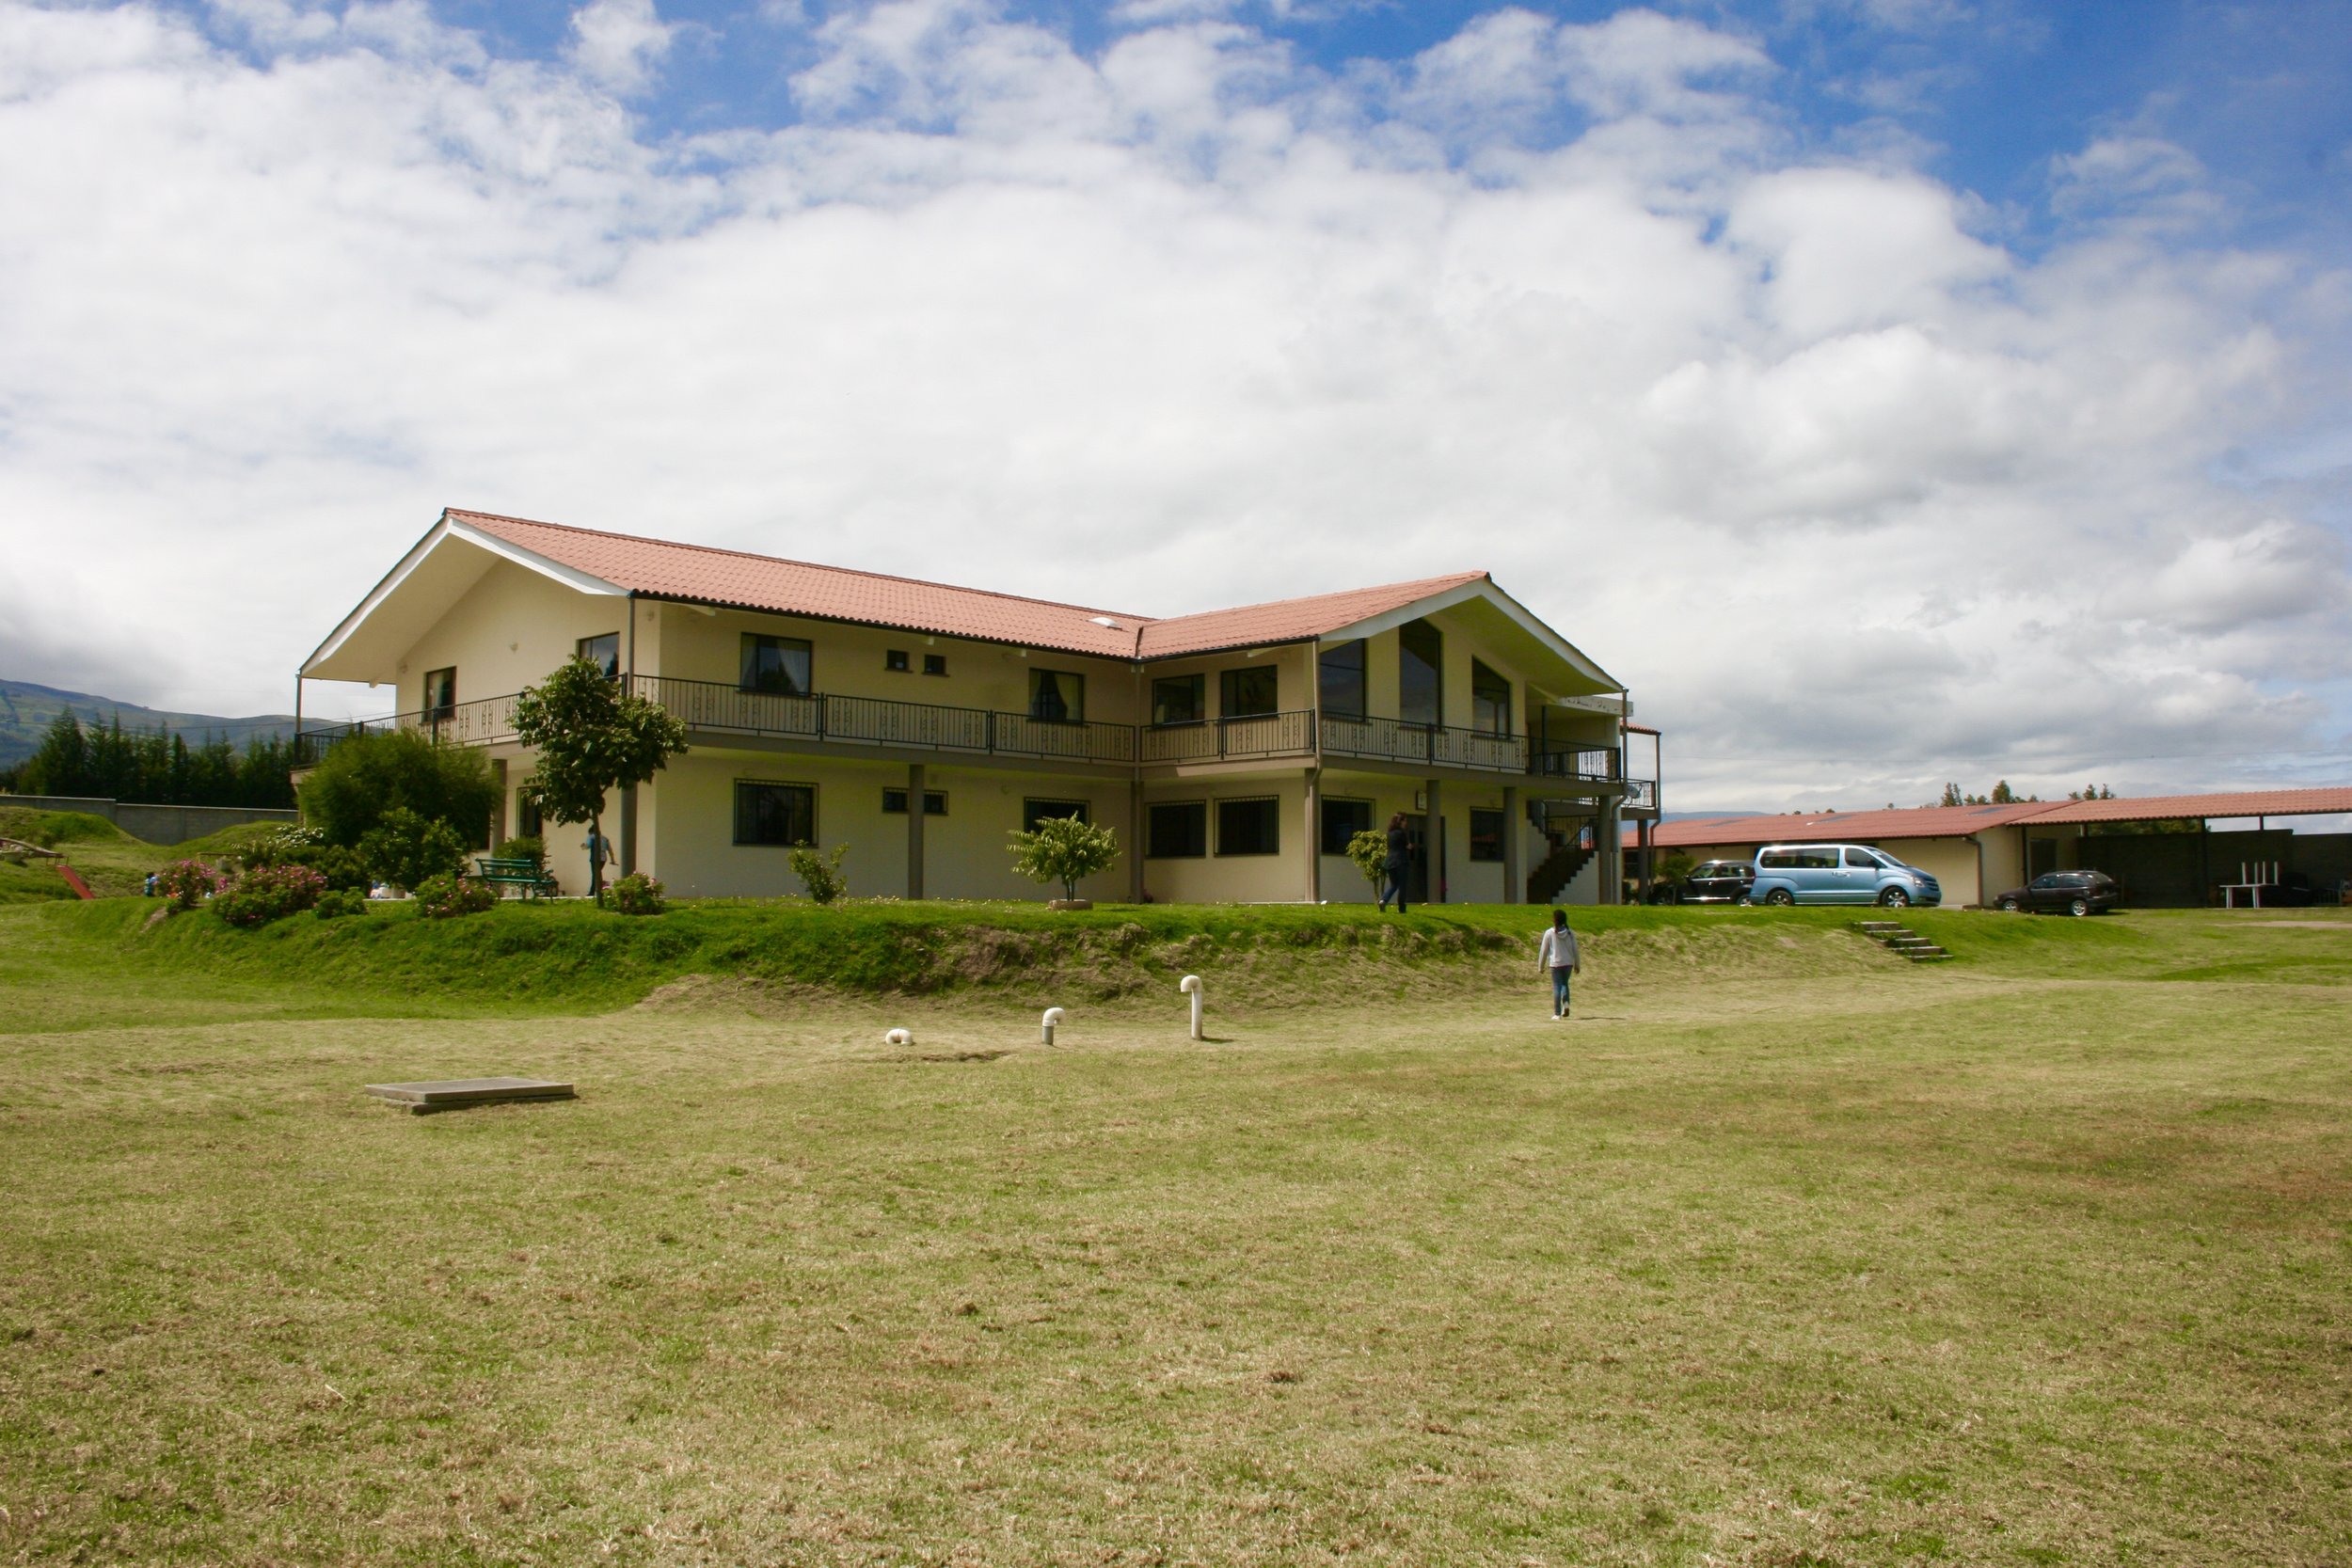 The completed 11,000 ft. home Dean designed & built in Latacunga, Ecuador